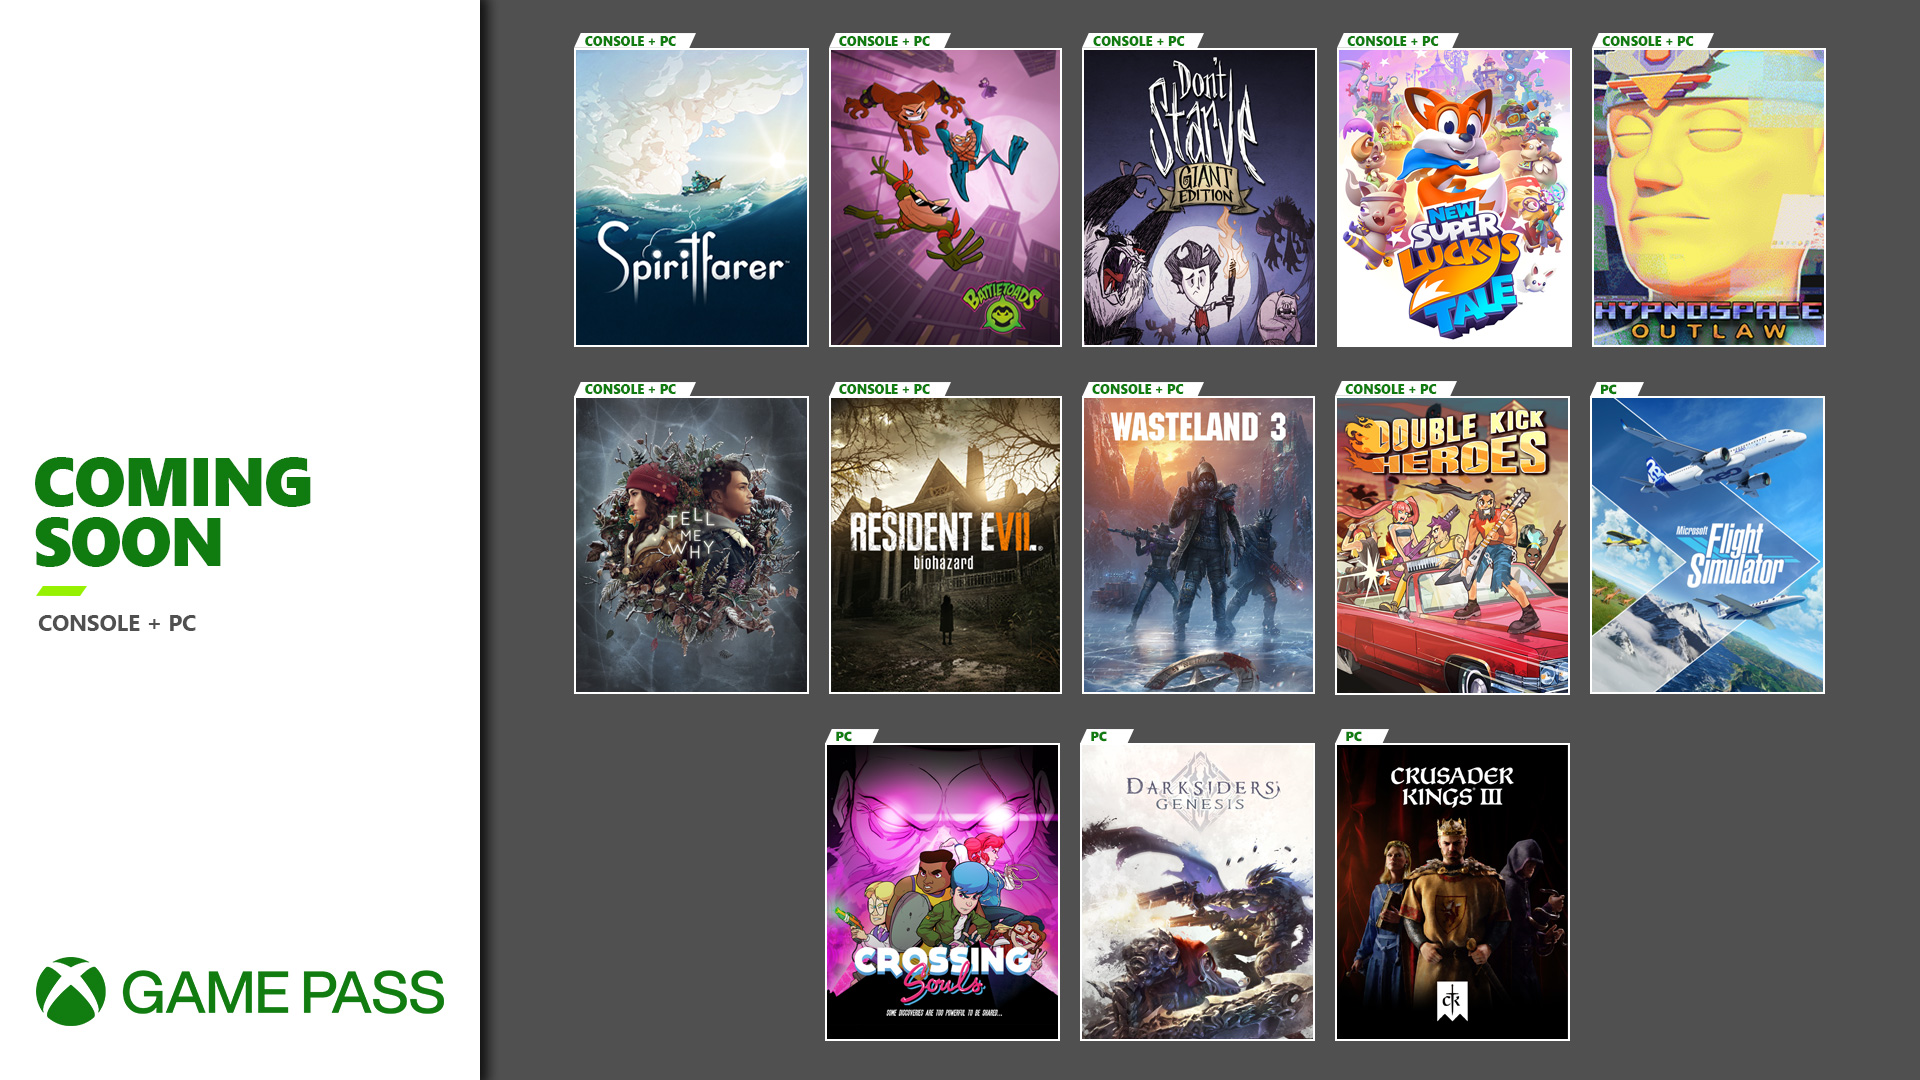 Coming Soon to Xbox Game Pass for PC & Console: Spiritfarer, Microsoft  Flight Simulator, Battletoads, Tell Me Why, Wasteland 3 and More - Xbox Wire